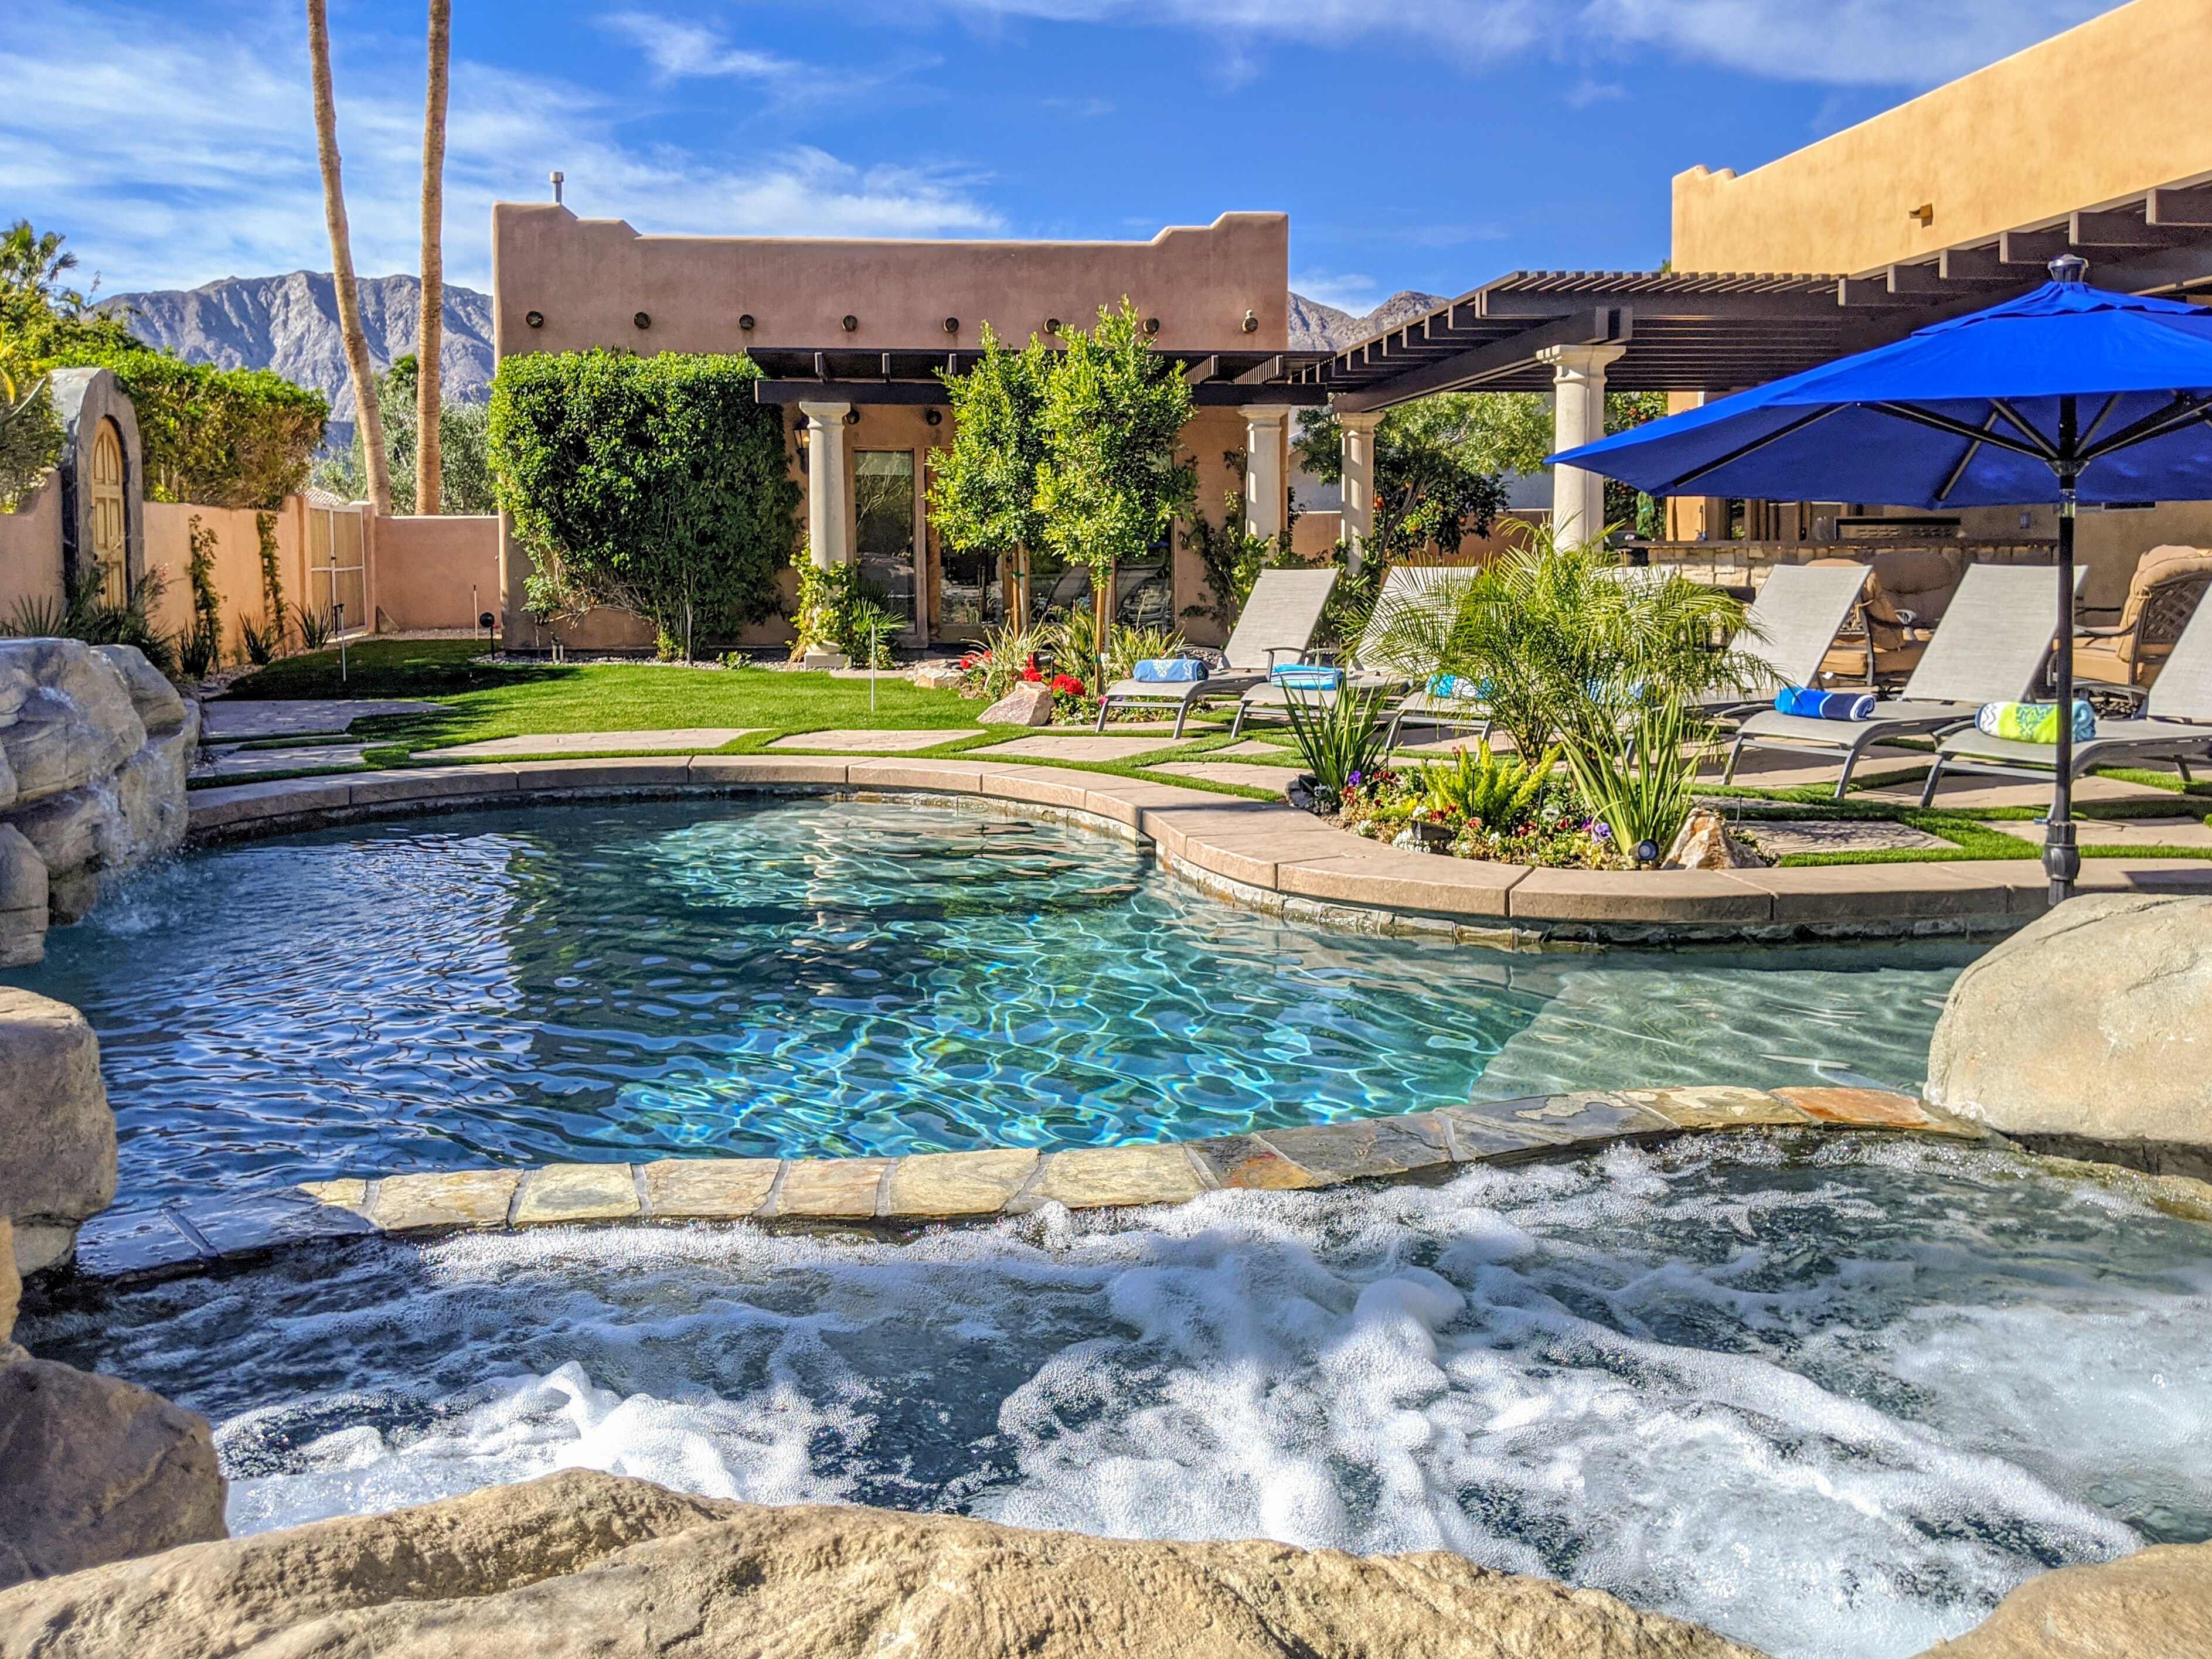 Welcome to La Quinta! This home is professionally managed by TurnKey Vacation Rentals.